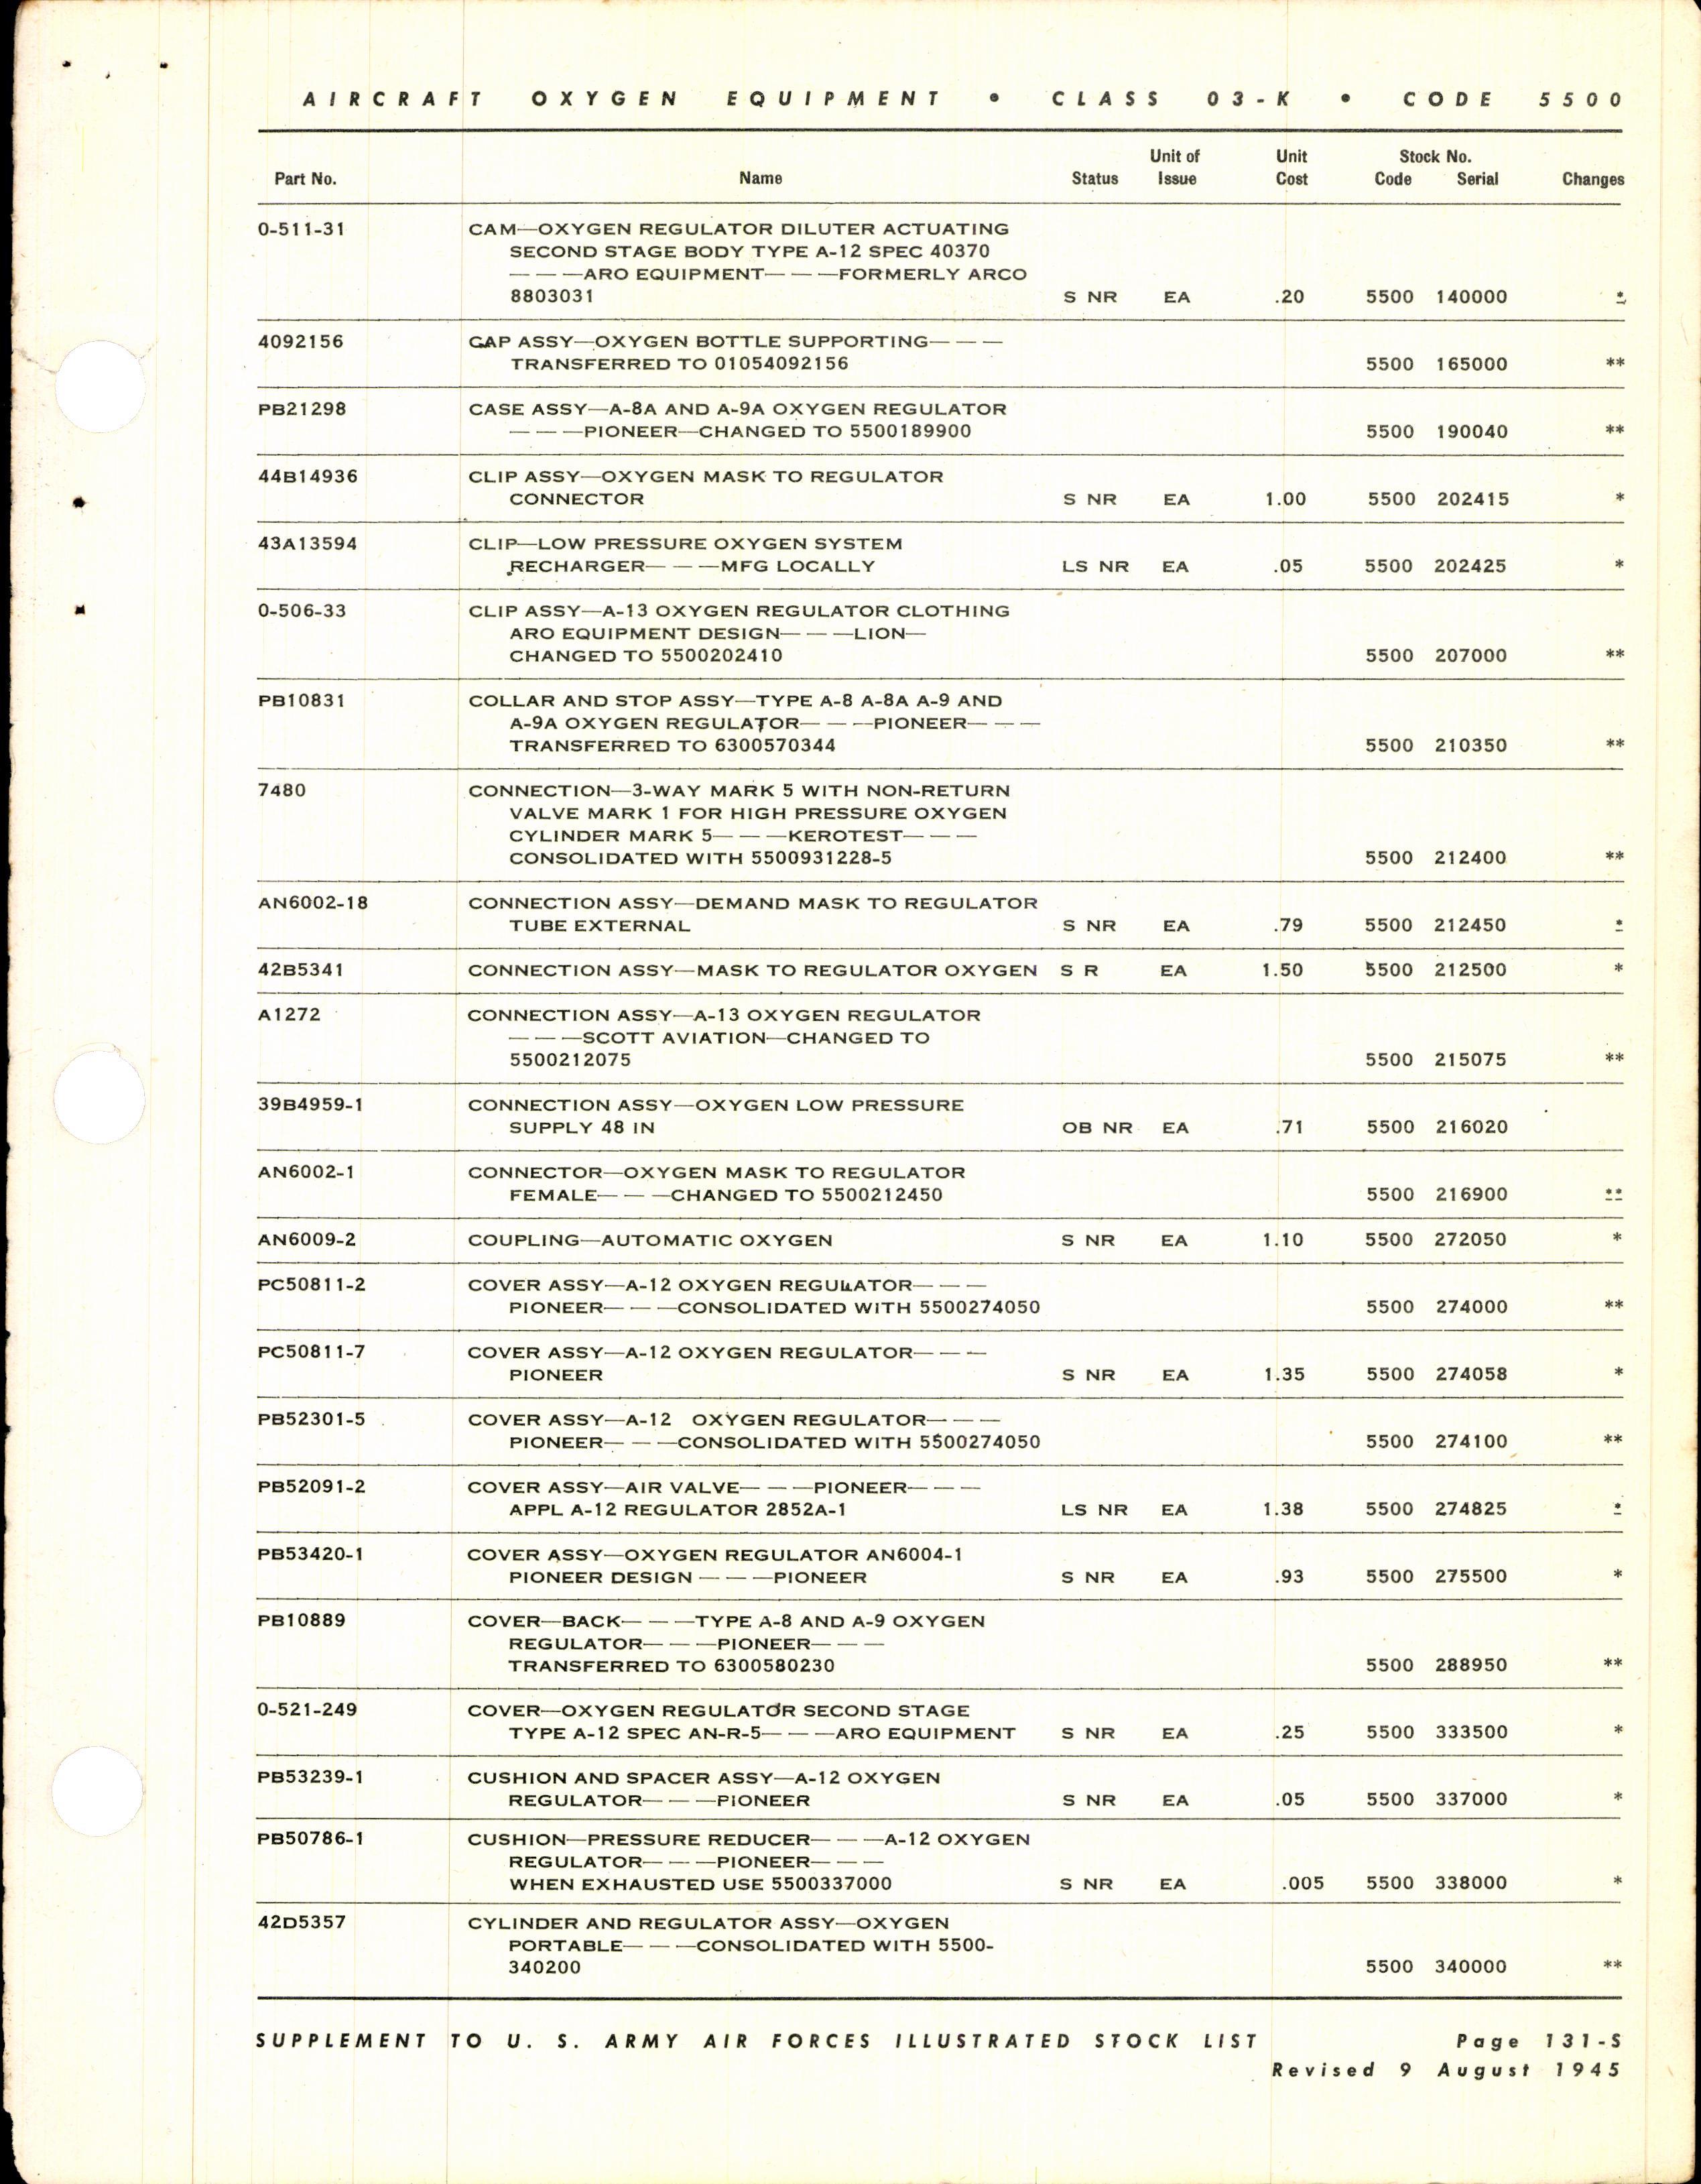 Sample page 9 from AirCorps Library document: Illustrated Stock List for Aircraft Oxygen Equipment